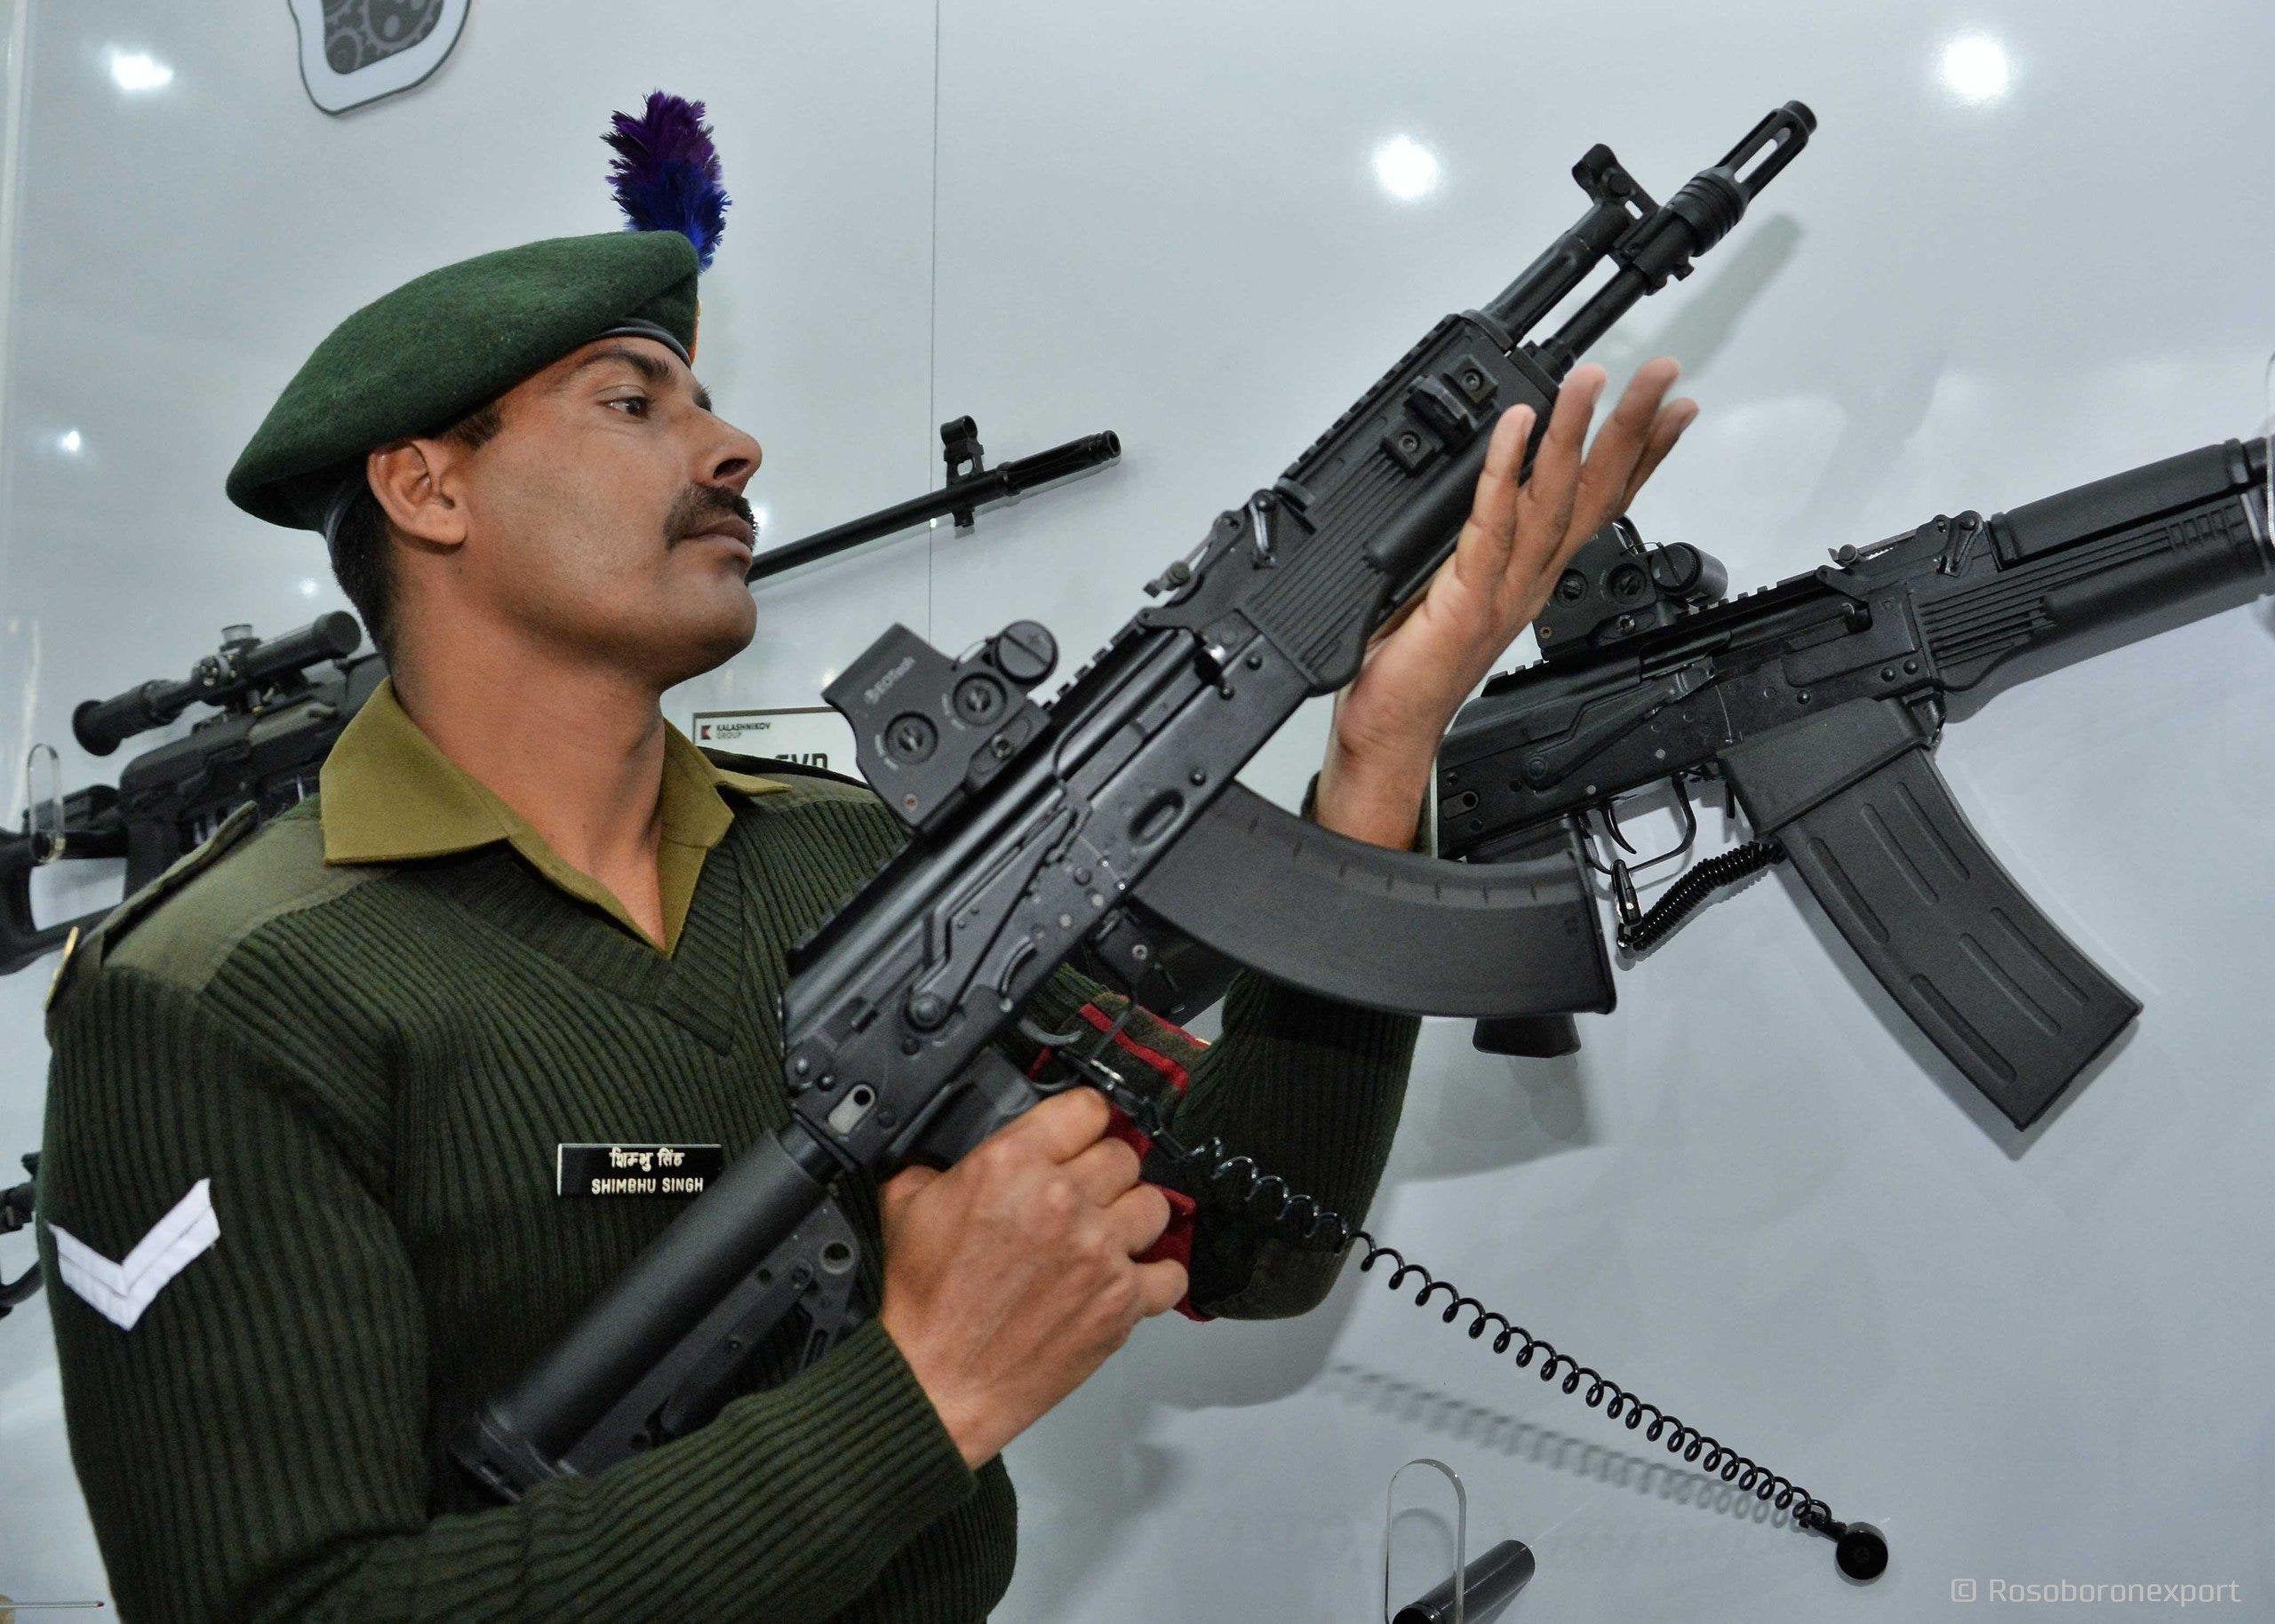 More firepower for armed forces: AK-203 Assault Rifles to be manufactured in UP soon